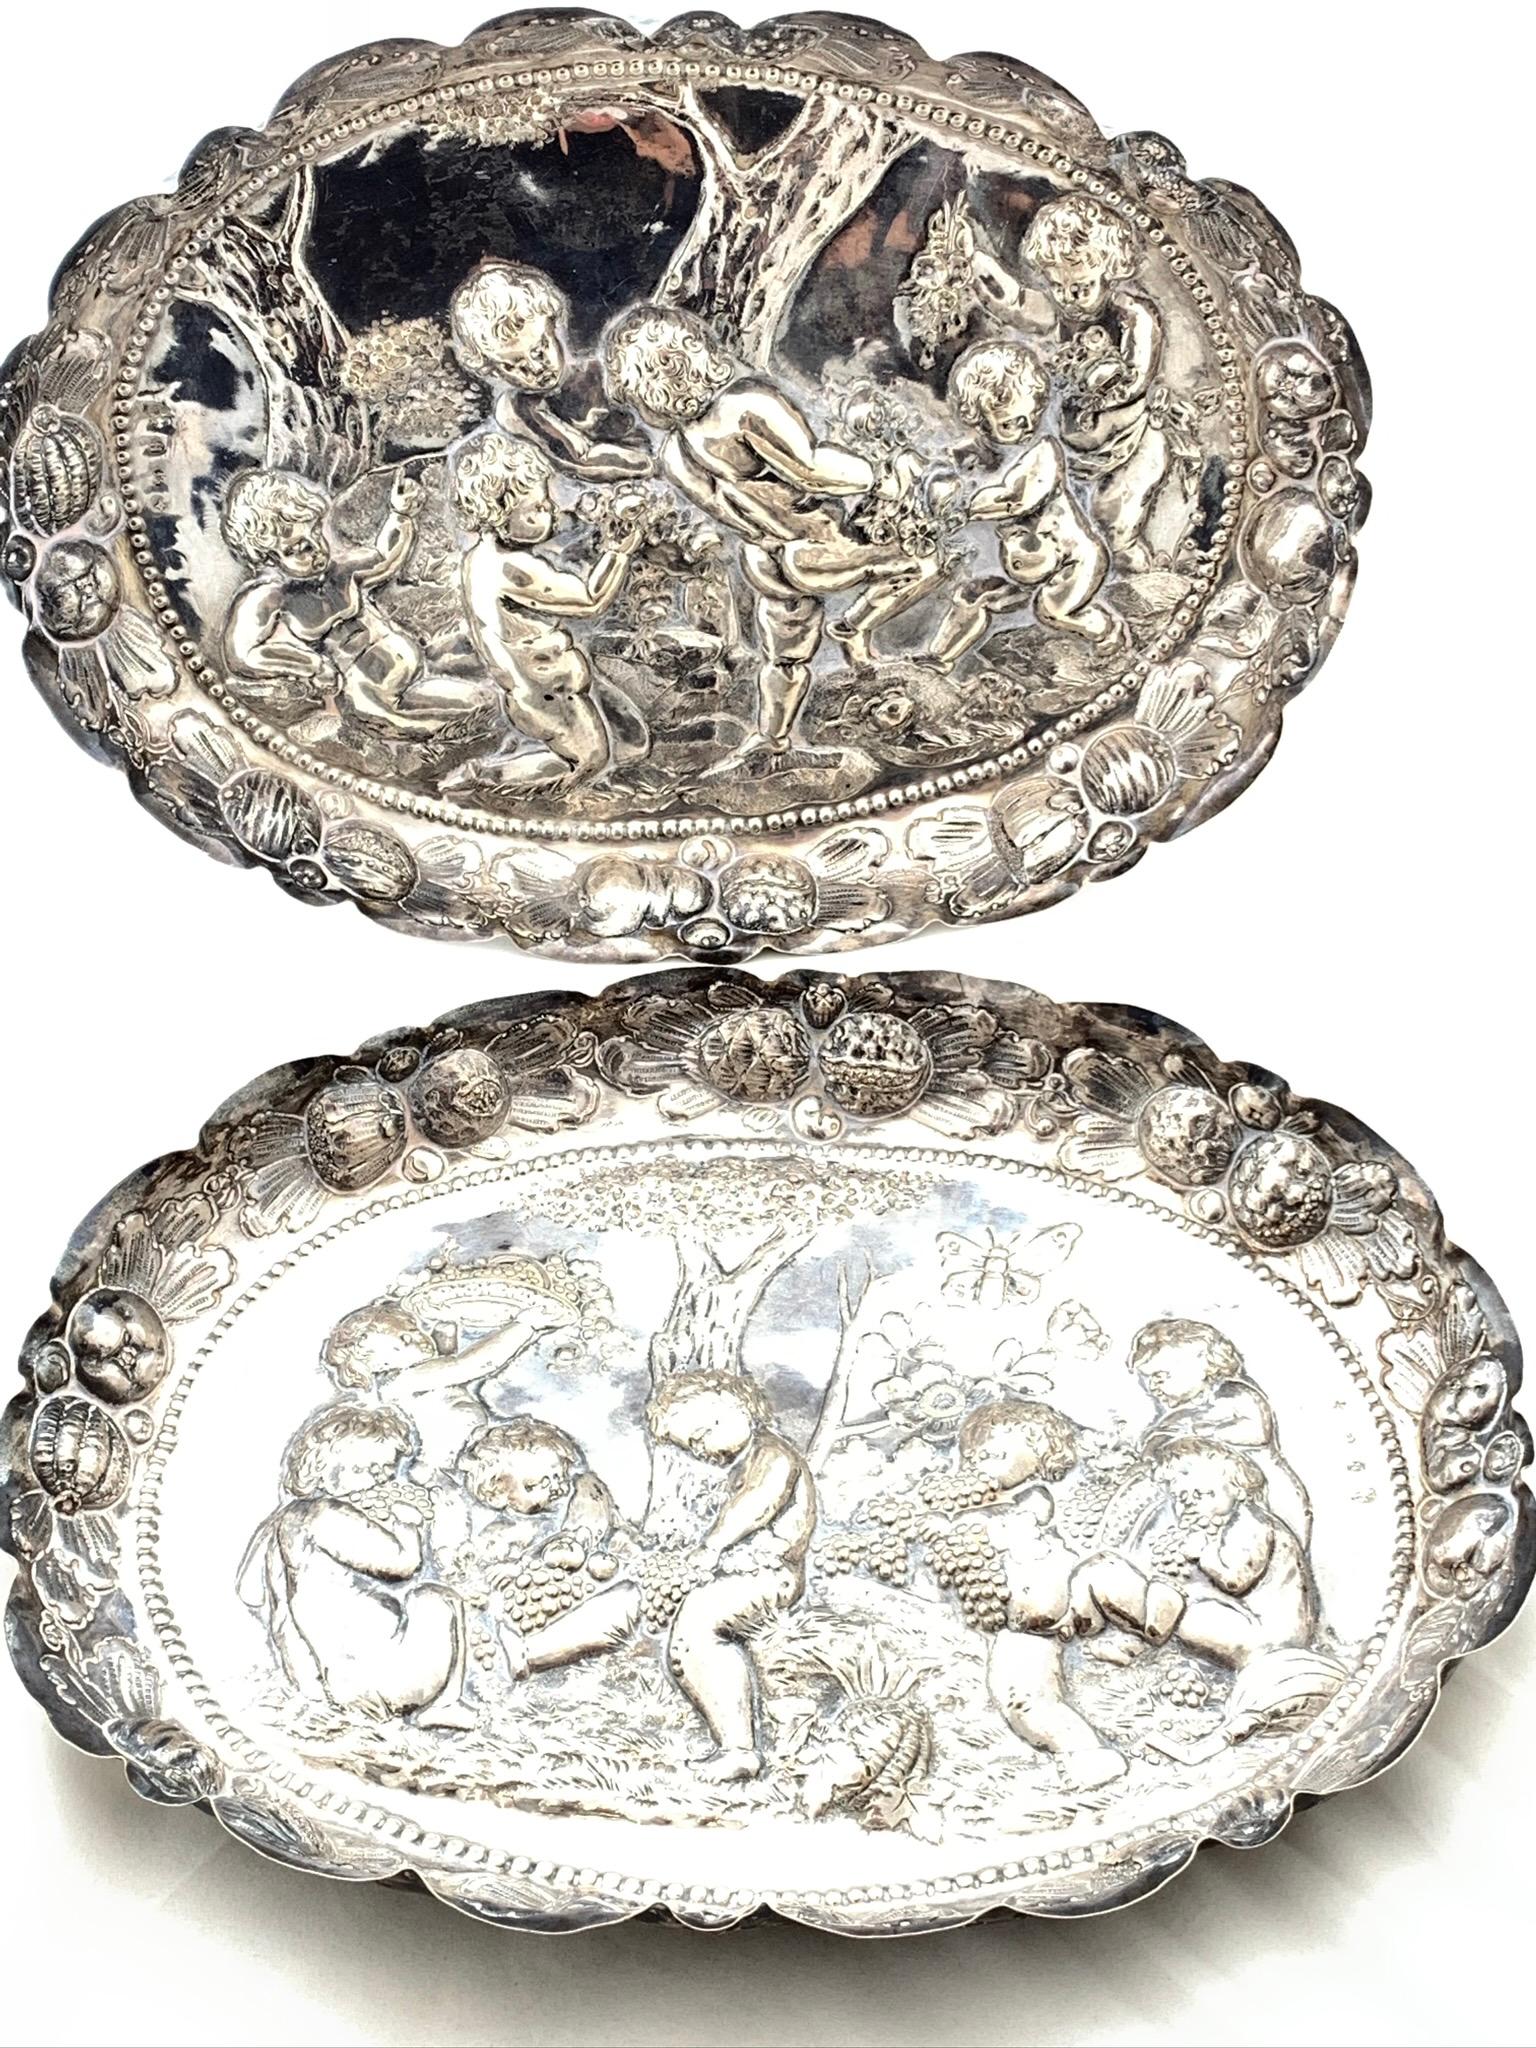 Two Silver Trays

Couple silver trays with a scene of little boys in a vineyard.
From the 18th century, in Nuremberg, Germany. 
Total weight: 705 grams